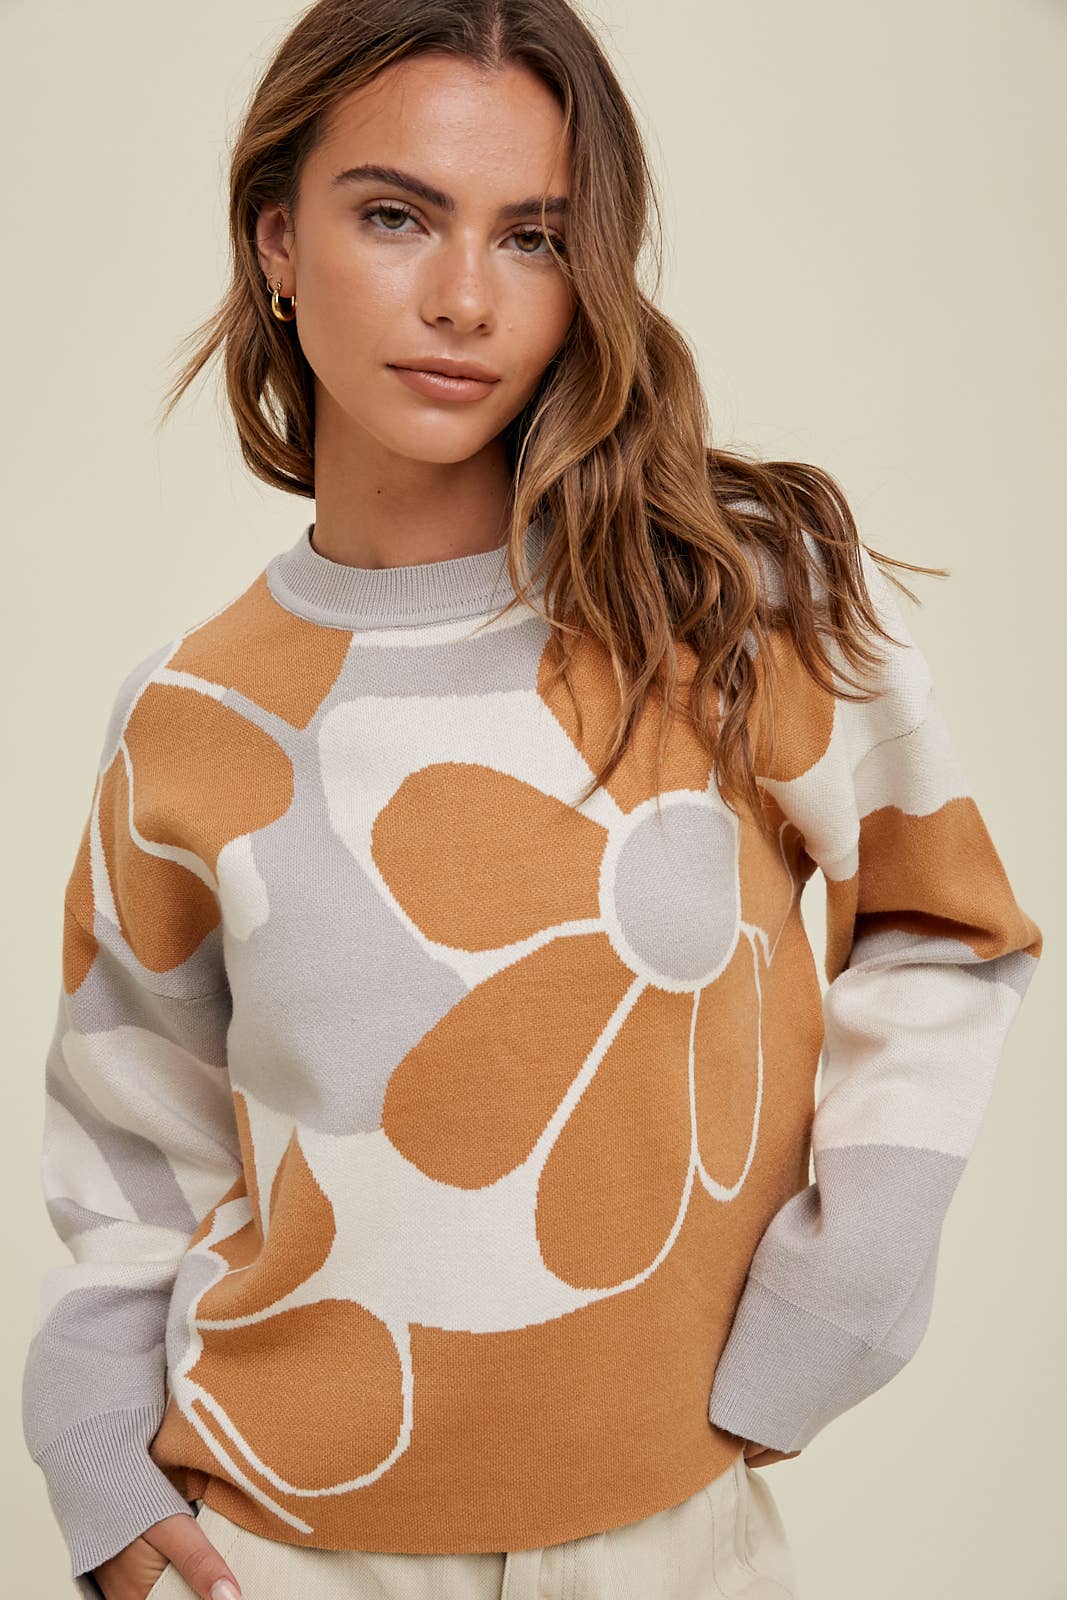 RETRO FLORAL DETAIL SWEATER